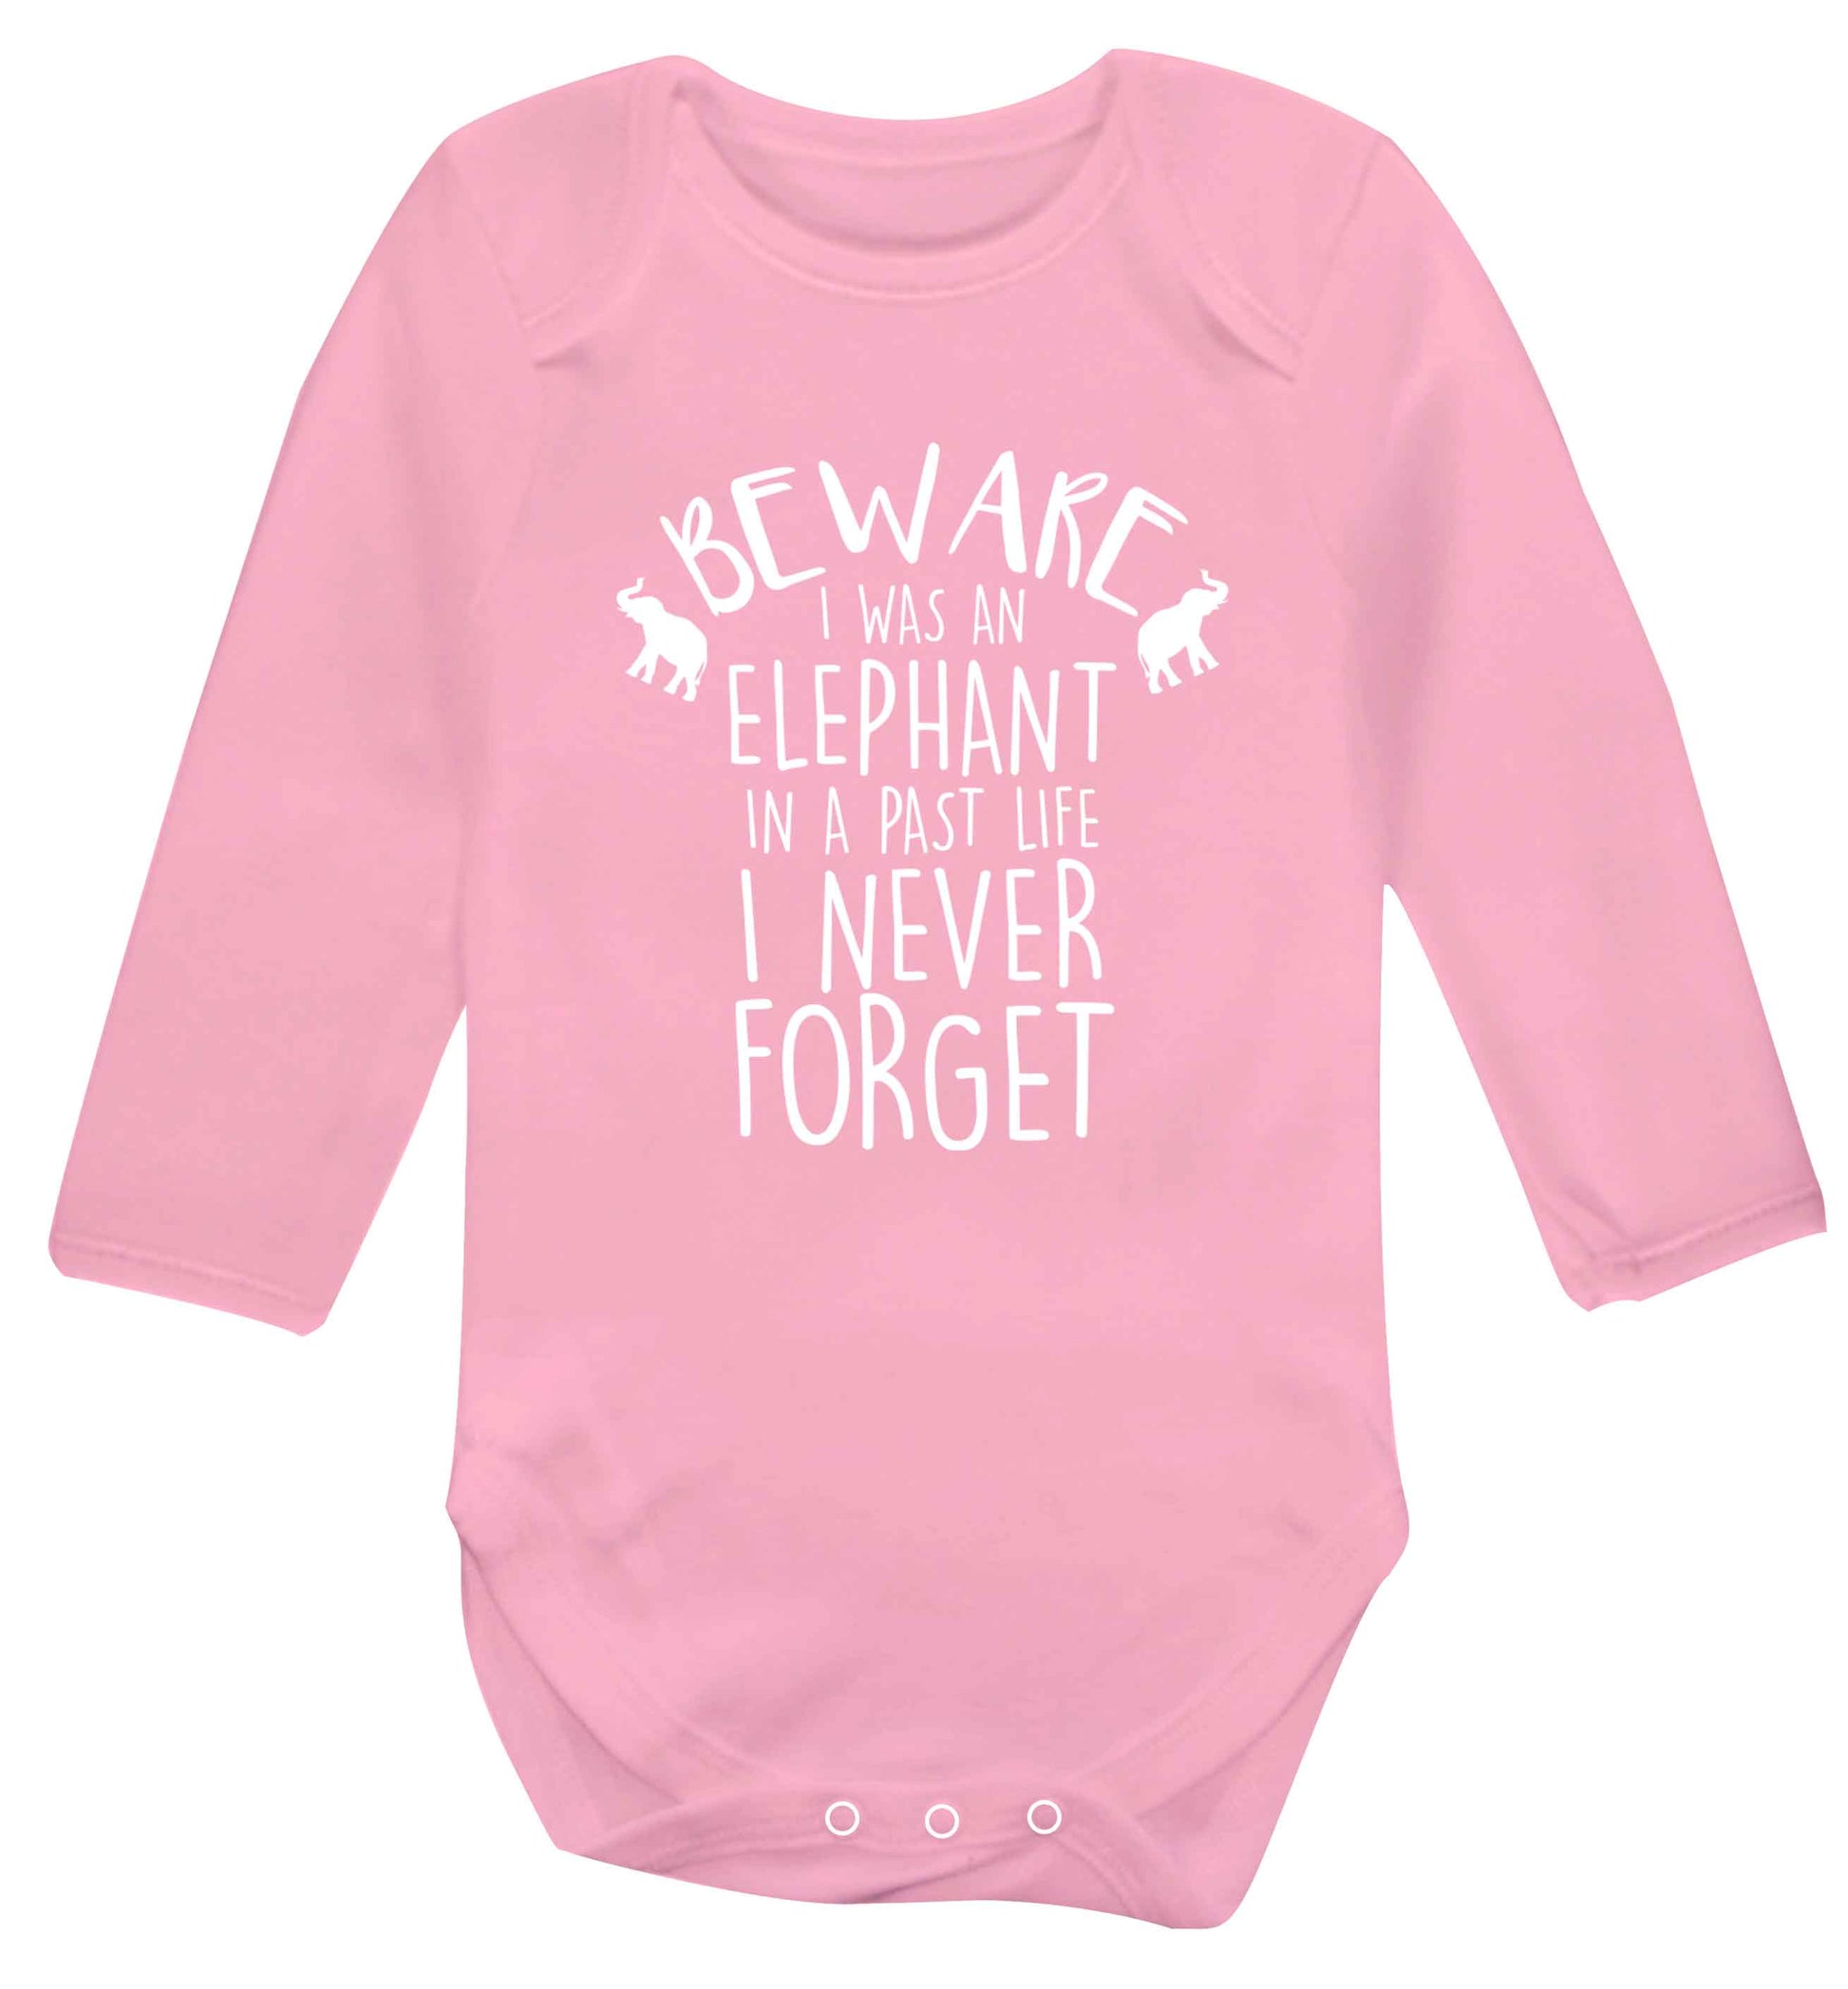 Beware I was an elephant in my past life I never forget Baby Vest long sleeved pale pink 6-12 months